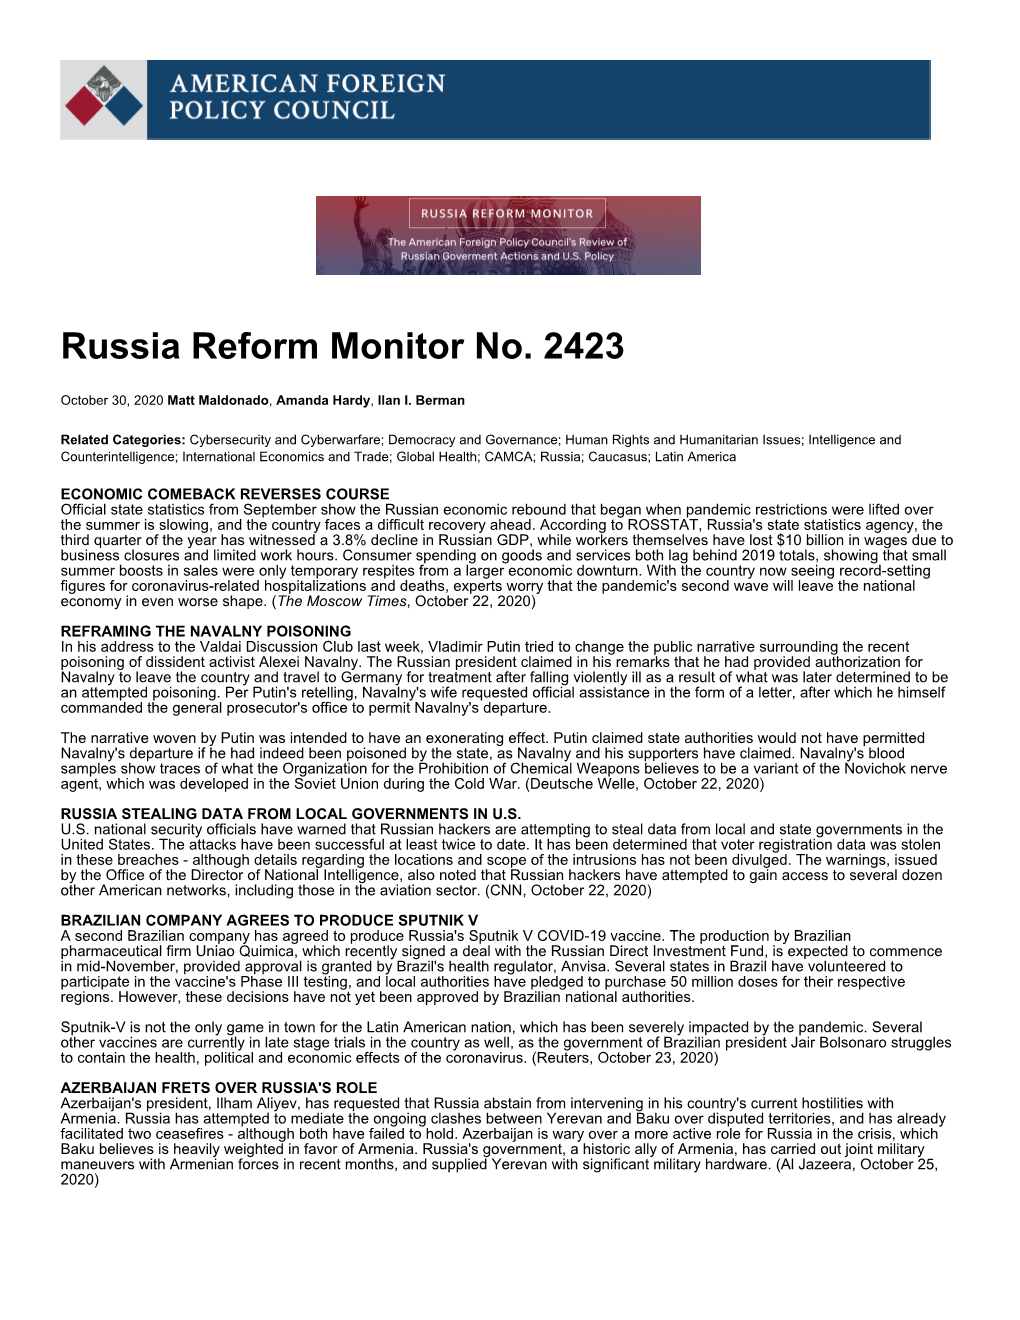 Russia Reform Monitor No. 2423 | American Foreign Policy Council